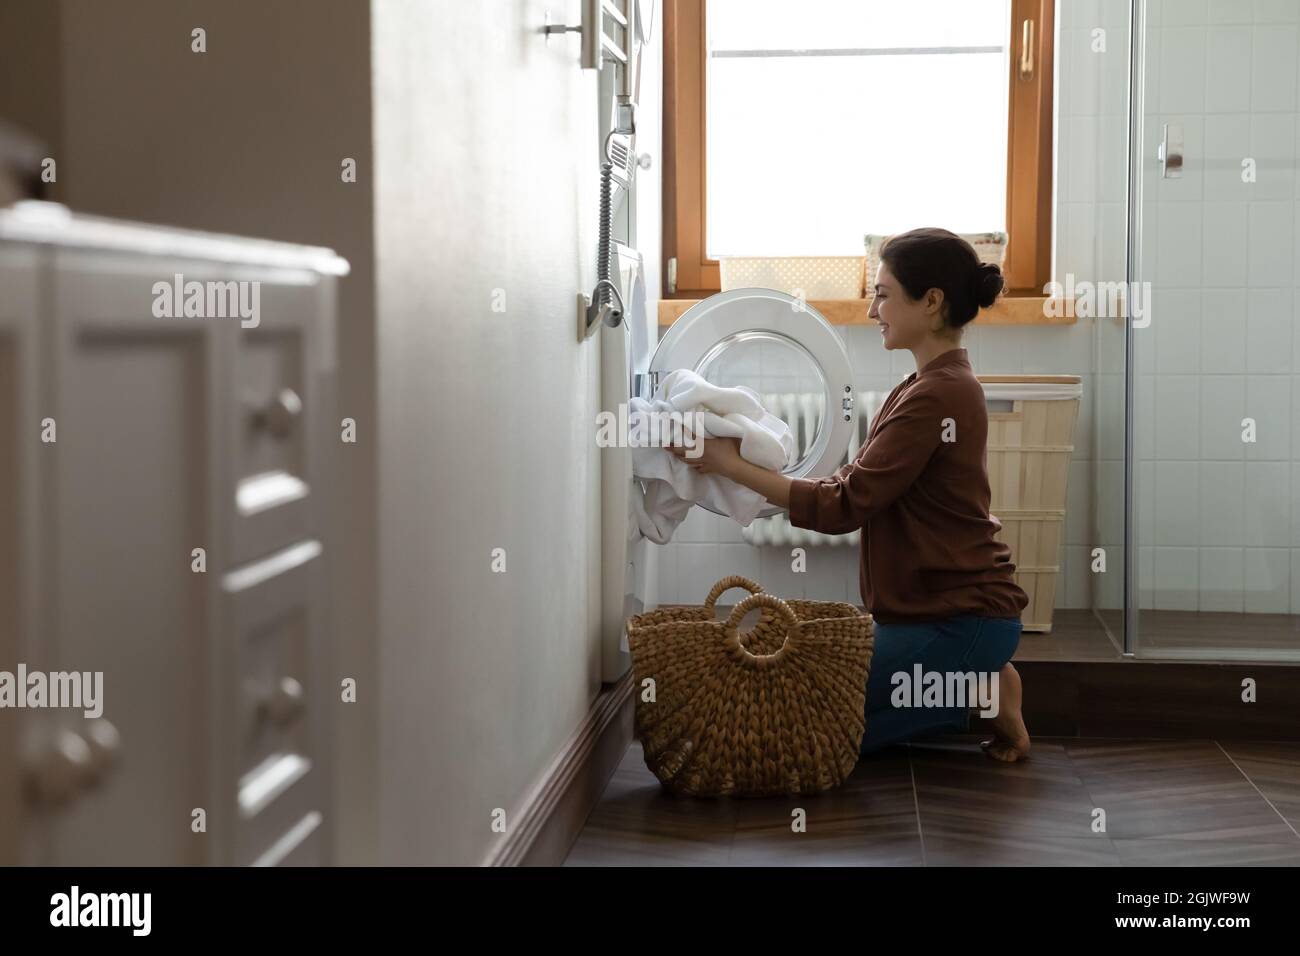 Happy indian woman using modern washing machine for easy laundering Stock Photo